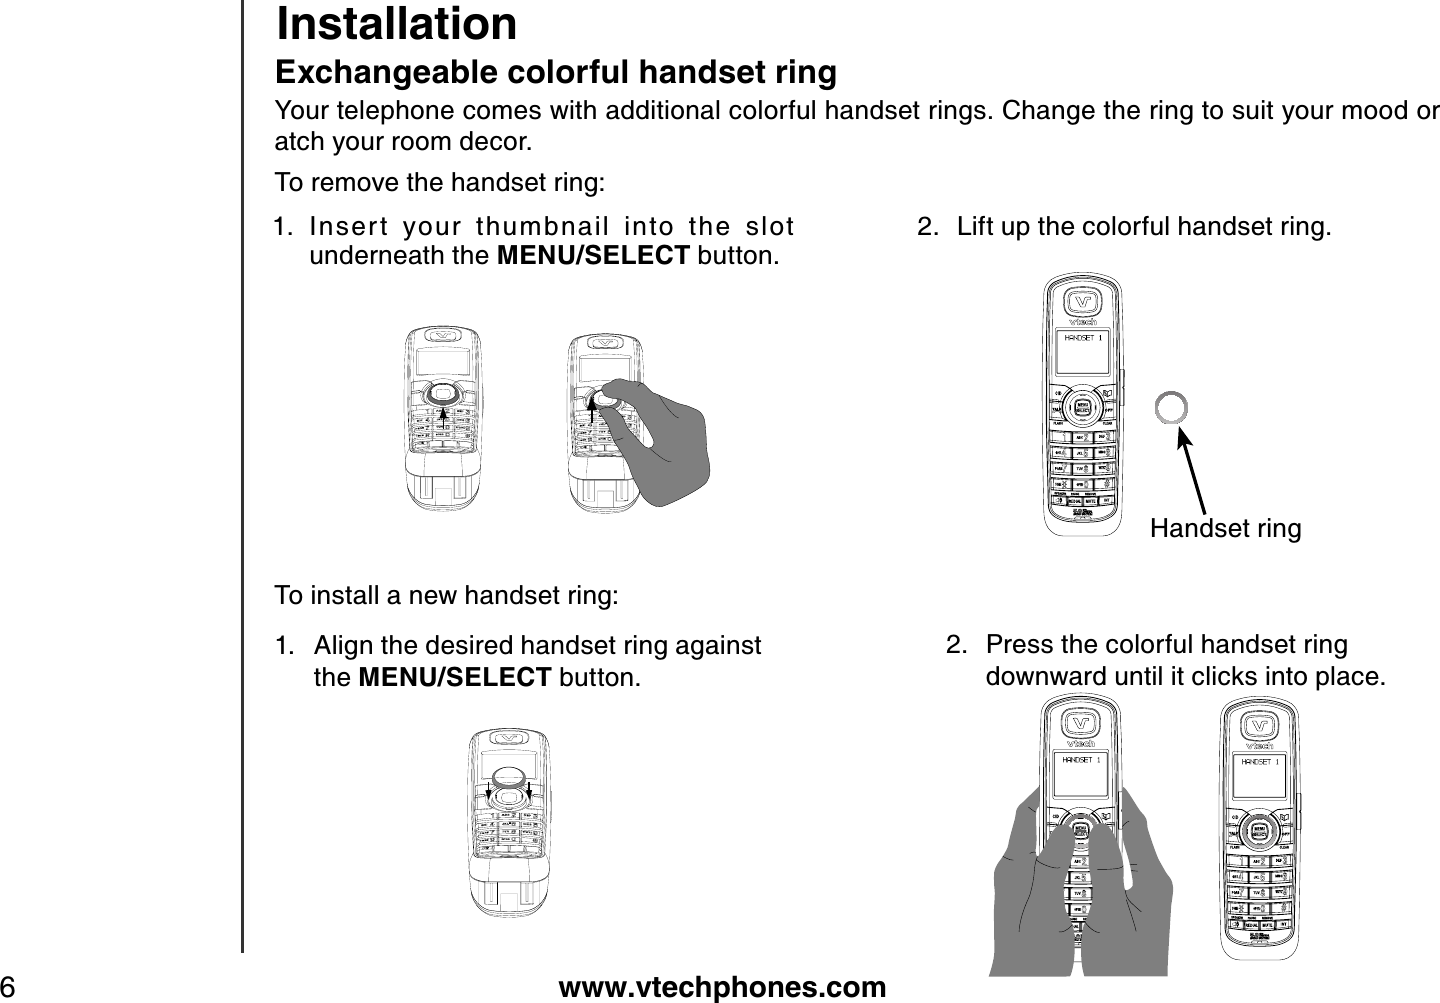 www.vtechphones.com6InstallationEx changeable colorful handset ringYour telephone comes with additional colorful handset rings. Change the ring to suit your mood or atch your room decor.To remove the handset ring:Inser t  your  thumbnail  into  the  slot underneath the MENU/SELECT button.1. 2. Lift up the colorful handset ring.To install a new handset ring:1. Align the desired handset ring against the MENU/SELECT button.2. Press the colorful handset ring    downward until it clicks into place.Handset ring